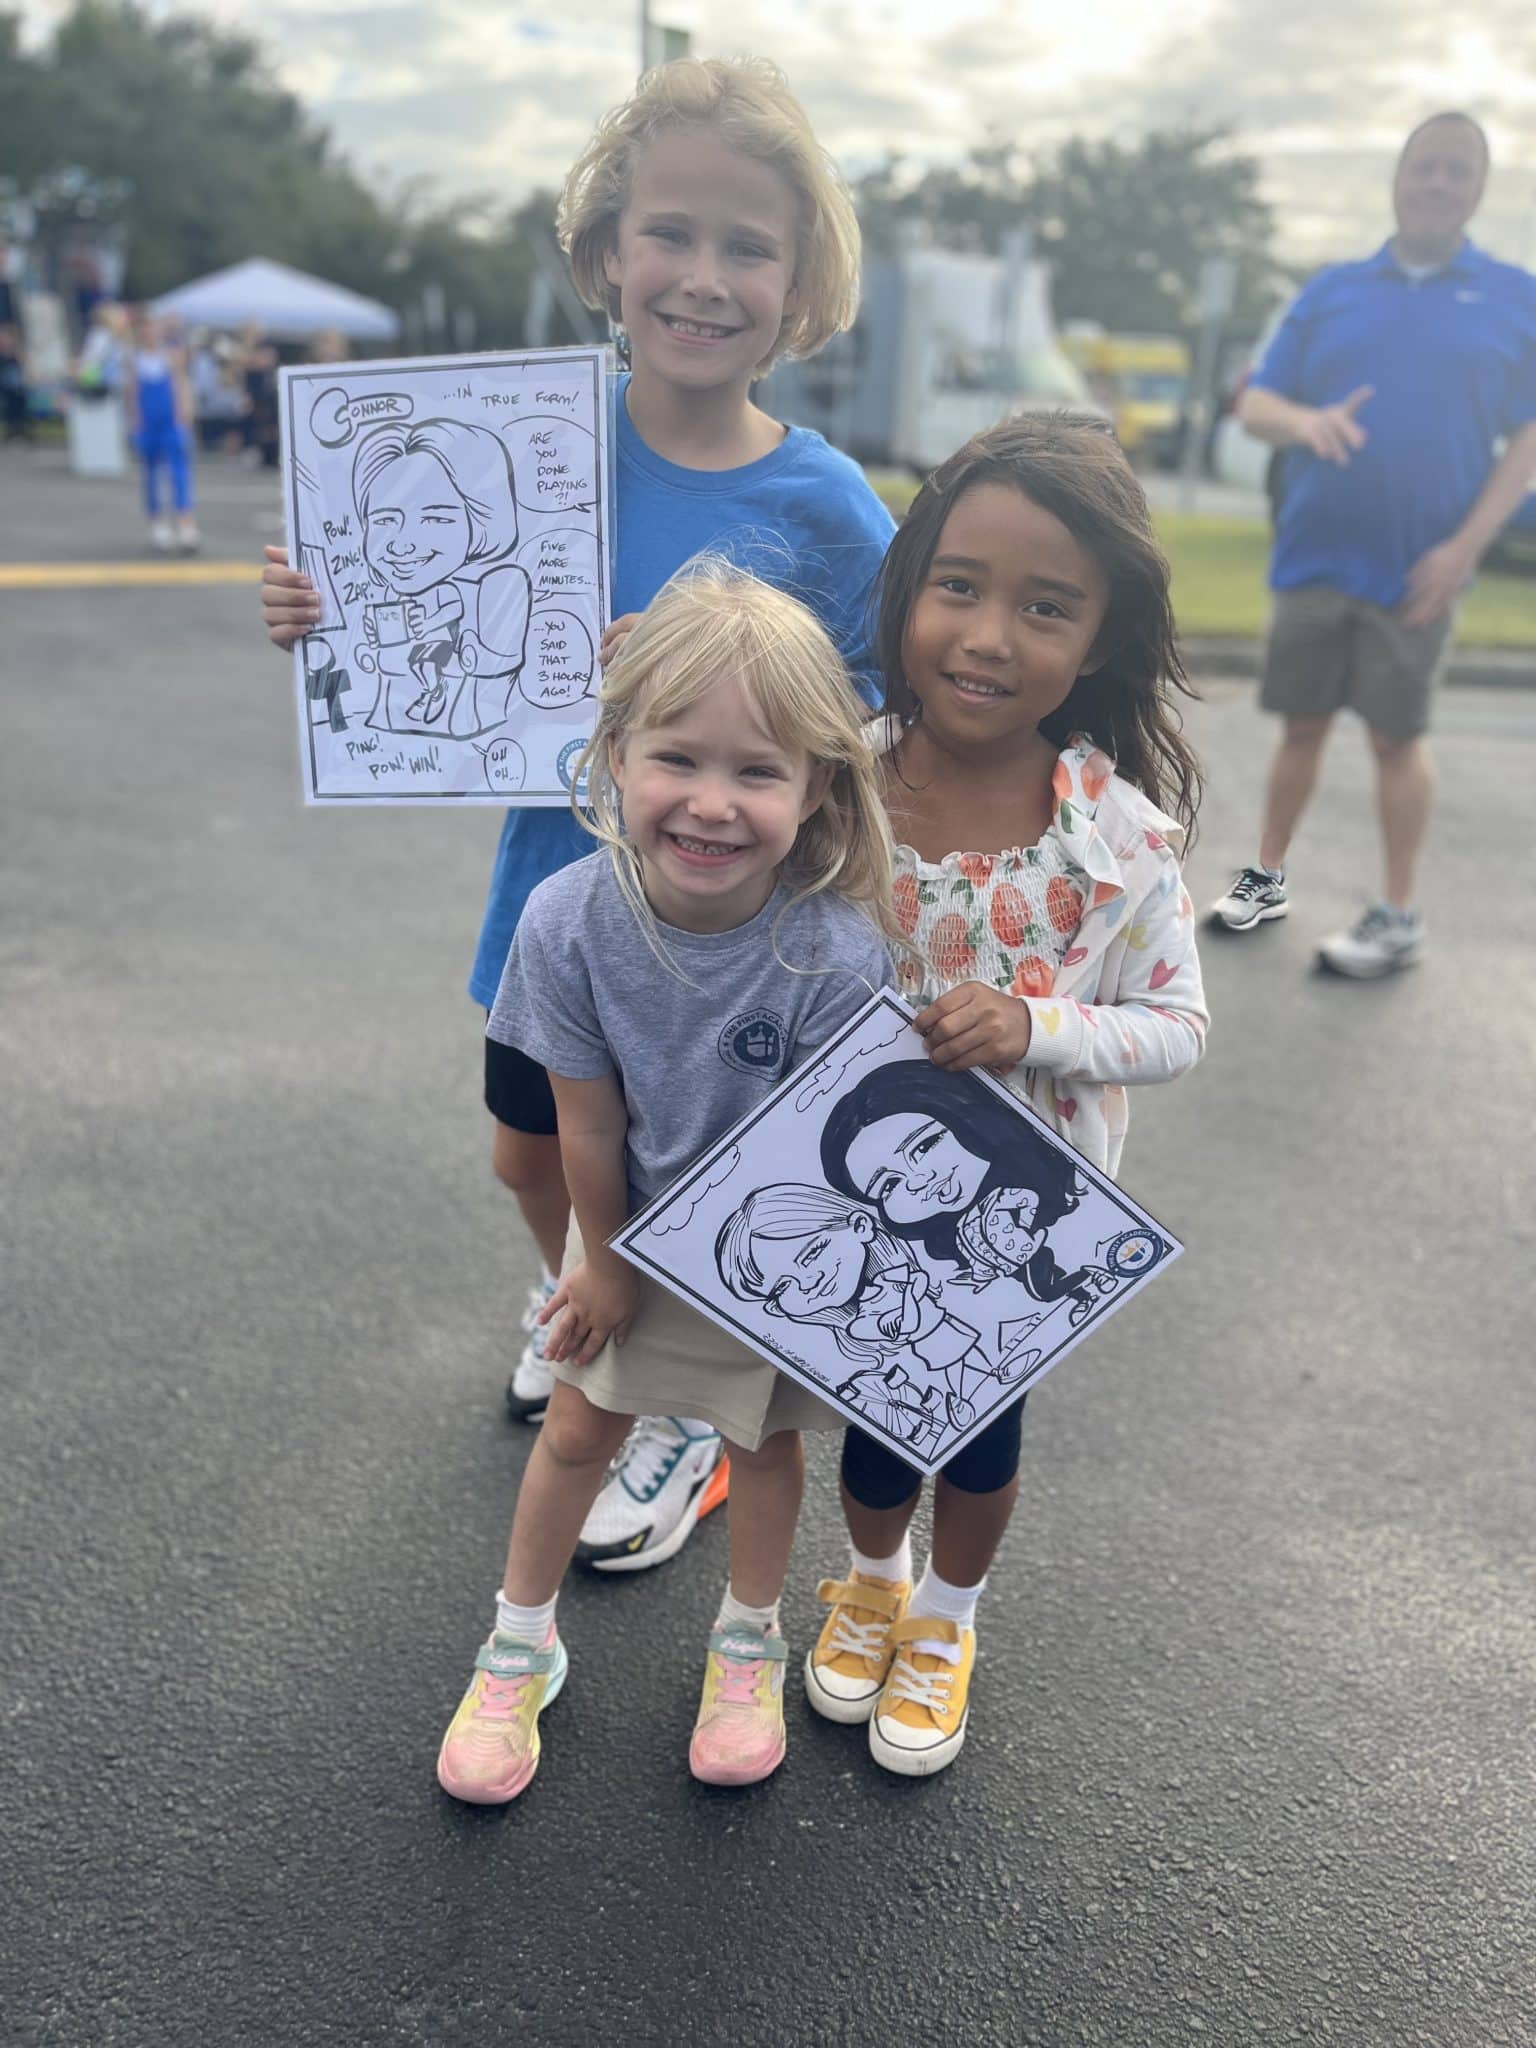 Kids holding up caricature drawings.